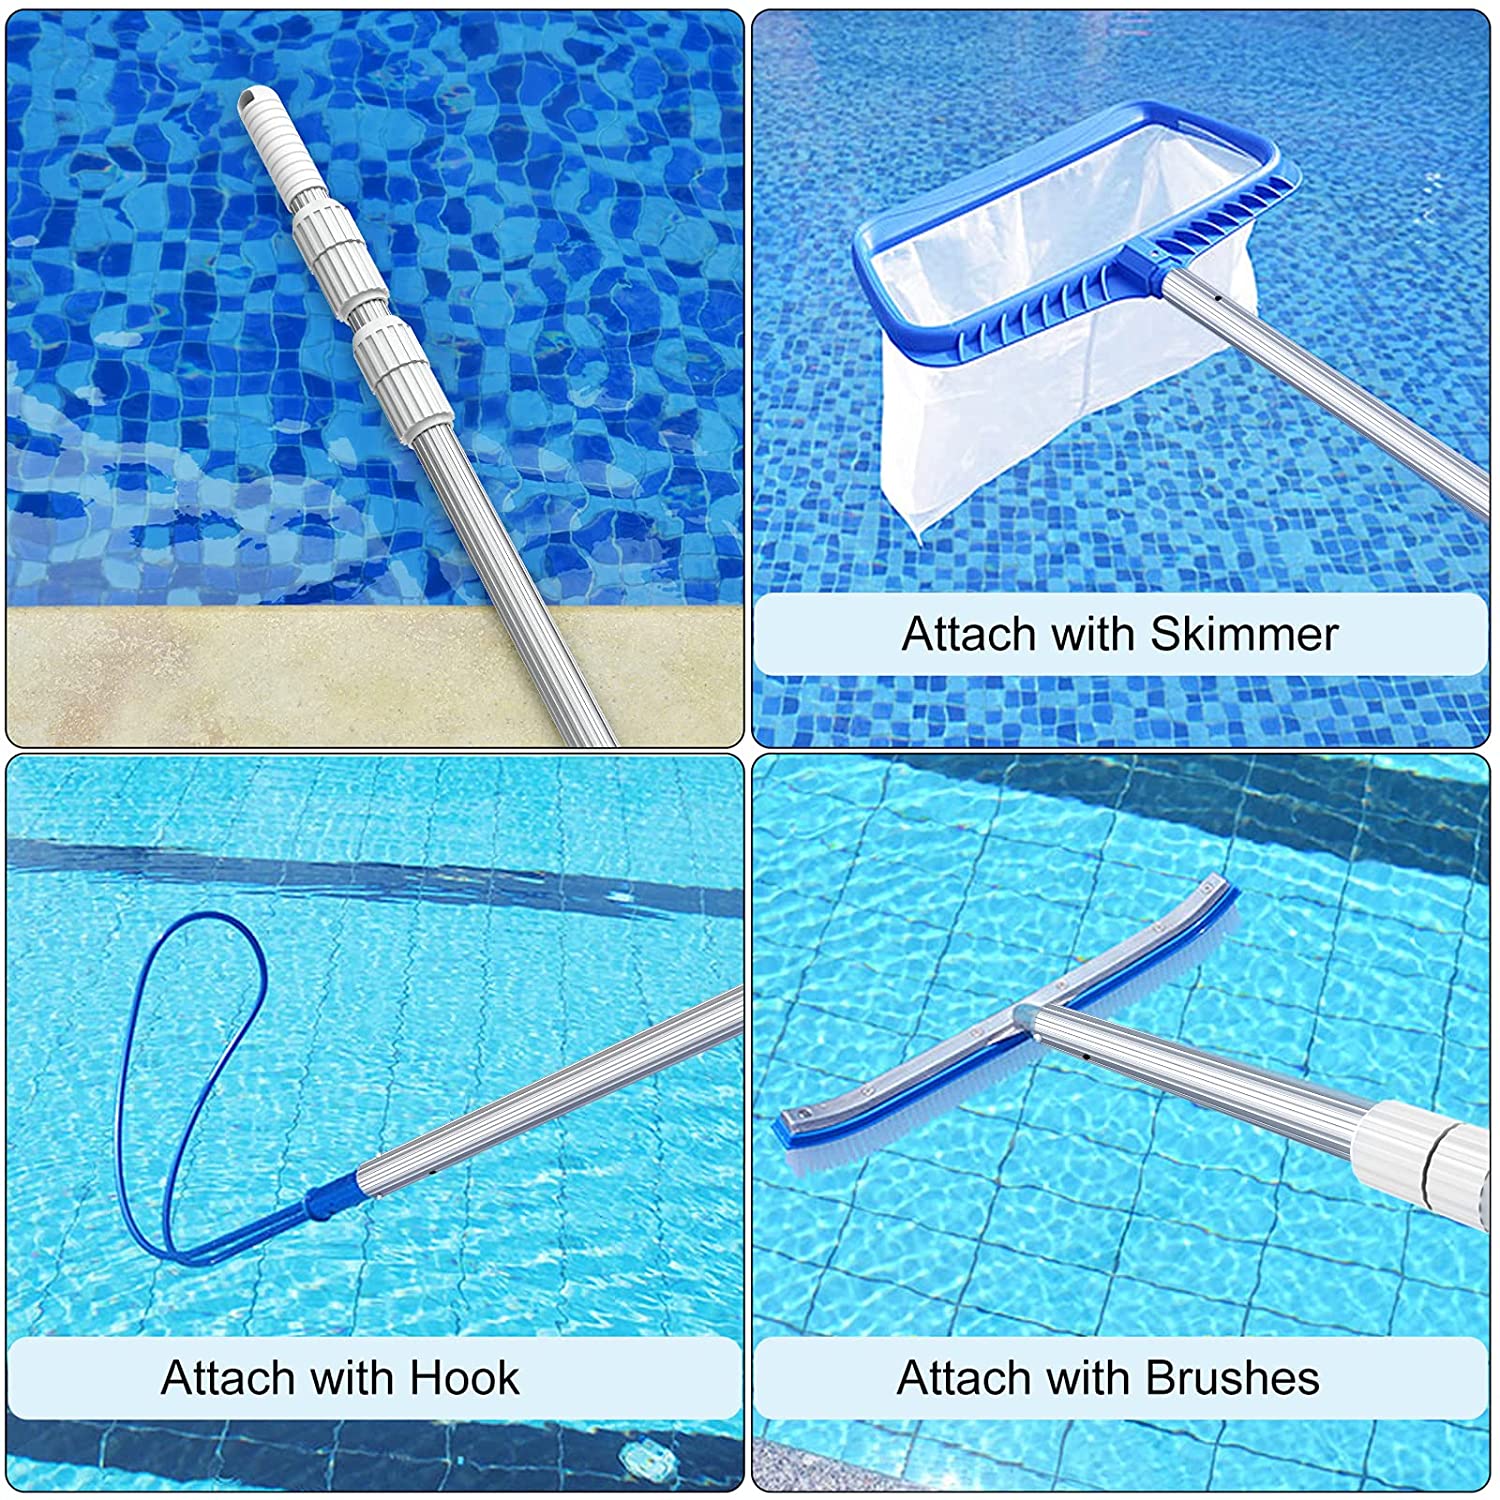 S-Union 12 Feet Thicken 1.3mm Aluminum Telescoping Swimming Pool Pole, Adjustable 3 Section Expandable Step-Up, Attach Connect Skimmer Nets, Rakes, Brushes, Vacuum Heads with Hoses, Universal 1.25"